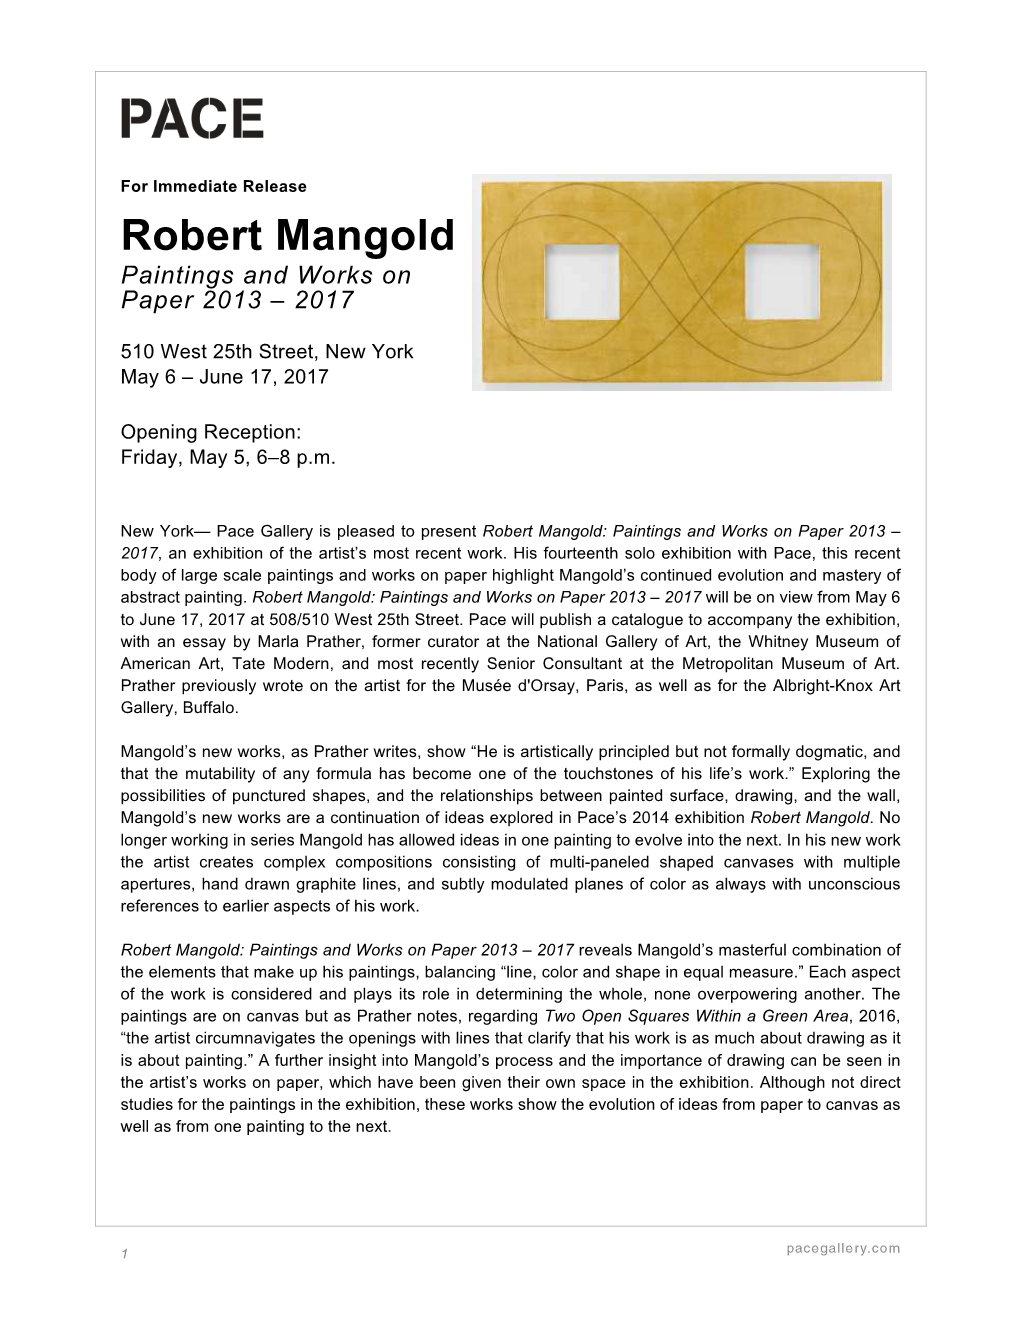 Robert Mangold Paintings and Works on Paper 2013 – 2017